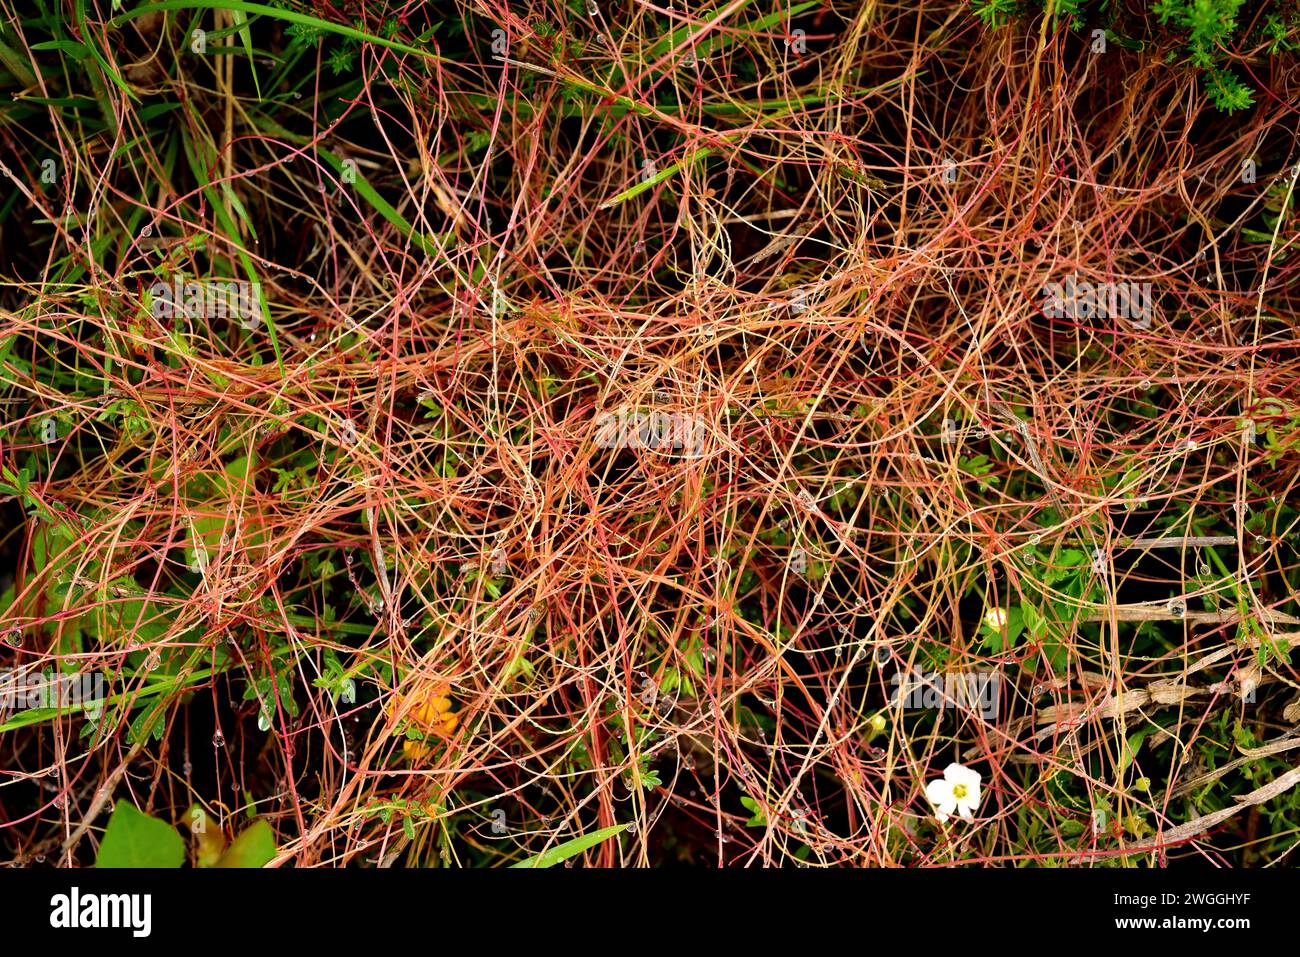 Greater dodder (Cuscuta europaea) is a parasitic plant native to Europe. This photo was taken in Muniellos Biosphere Reserve, Asturias, Spain. Stock Photo